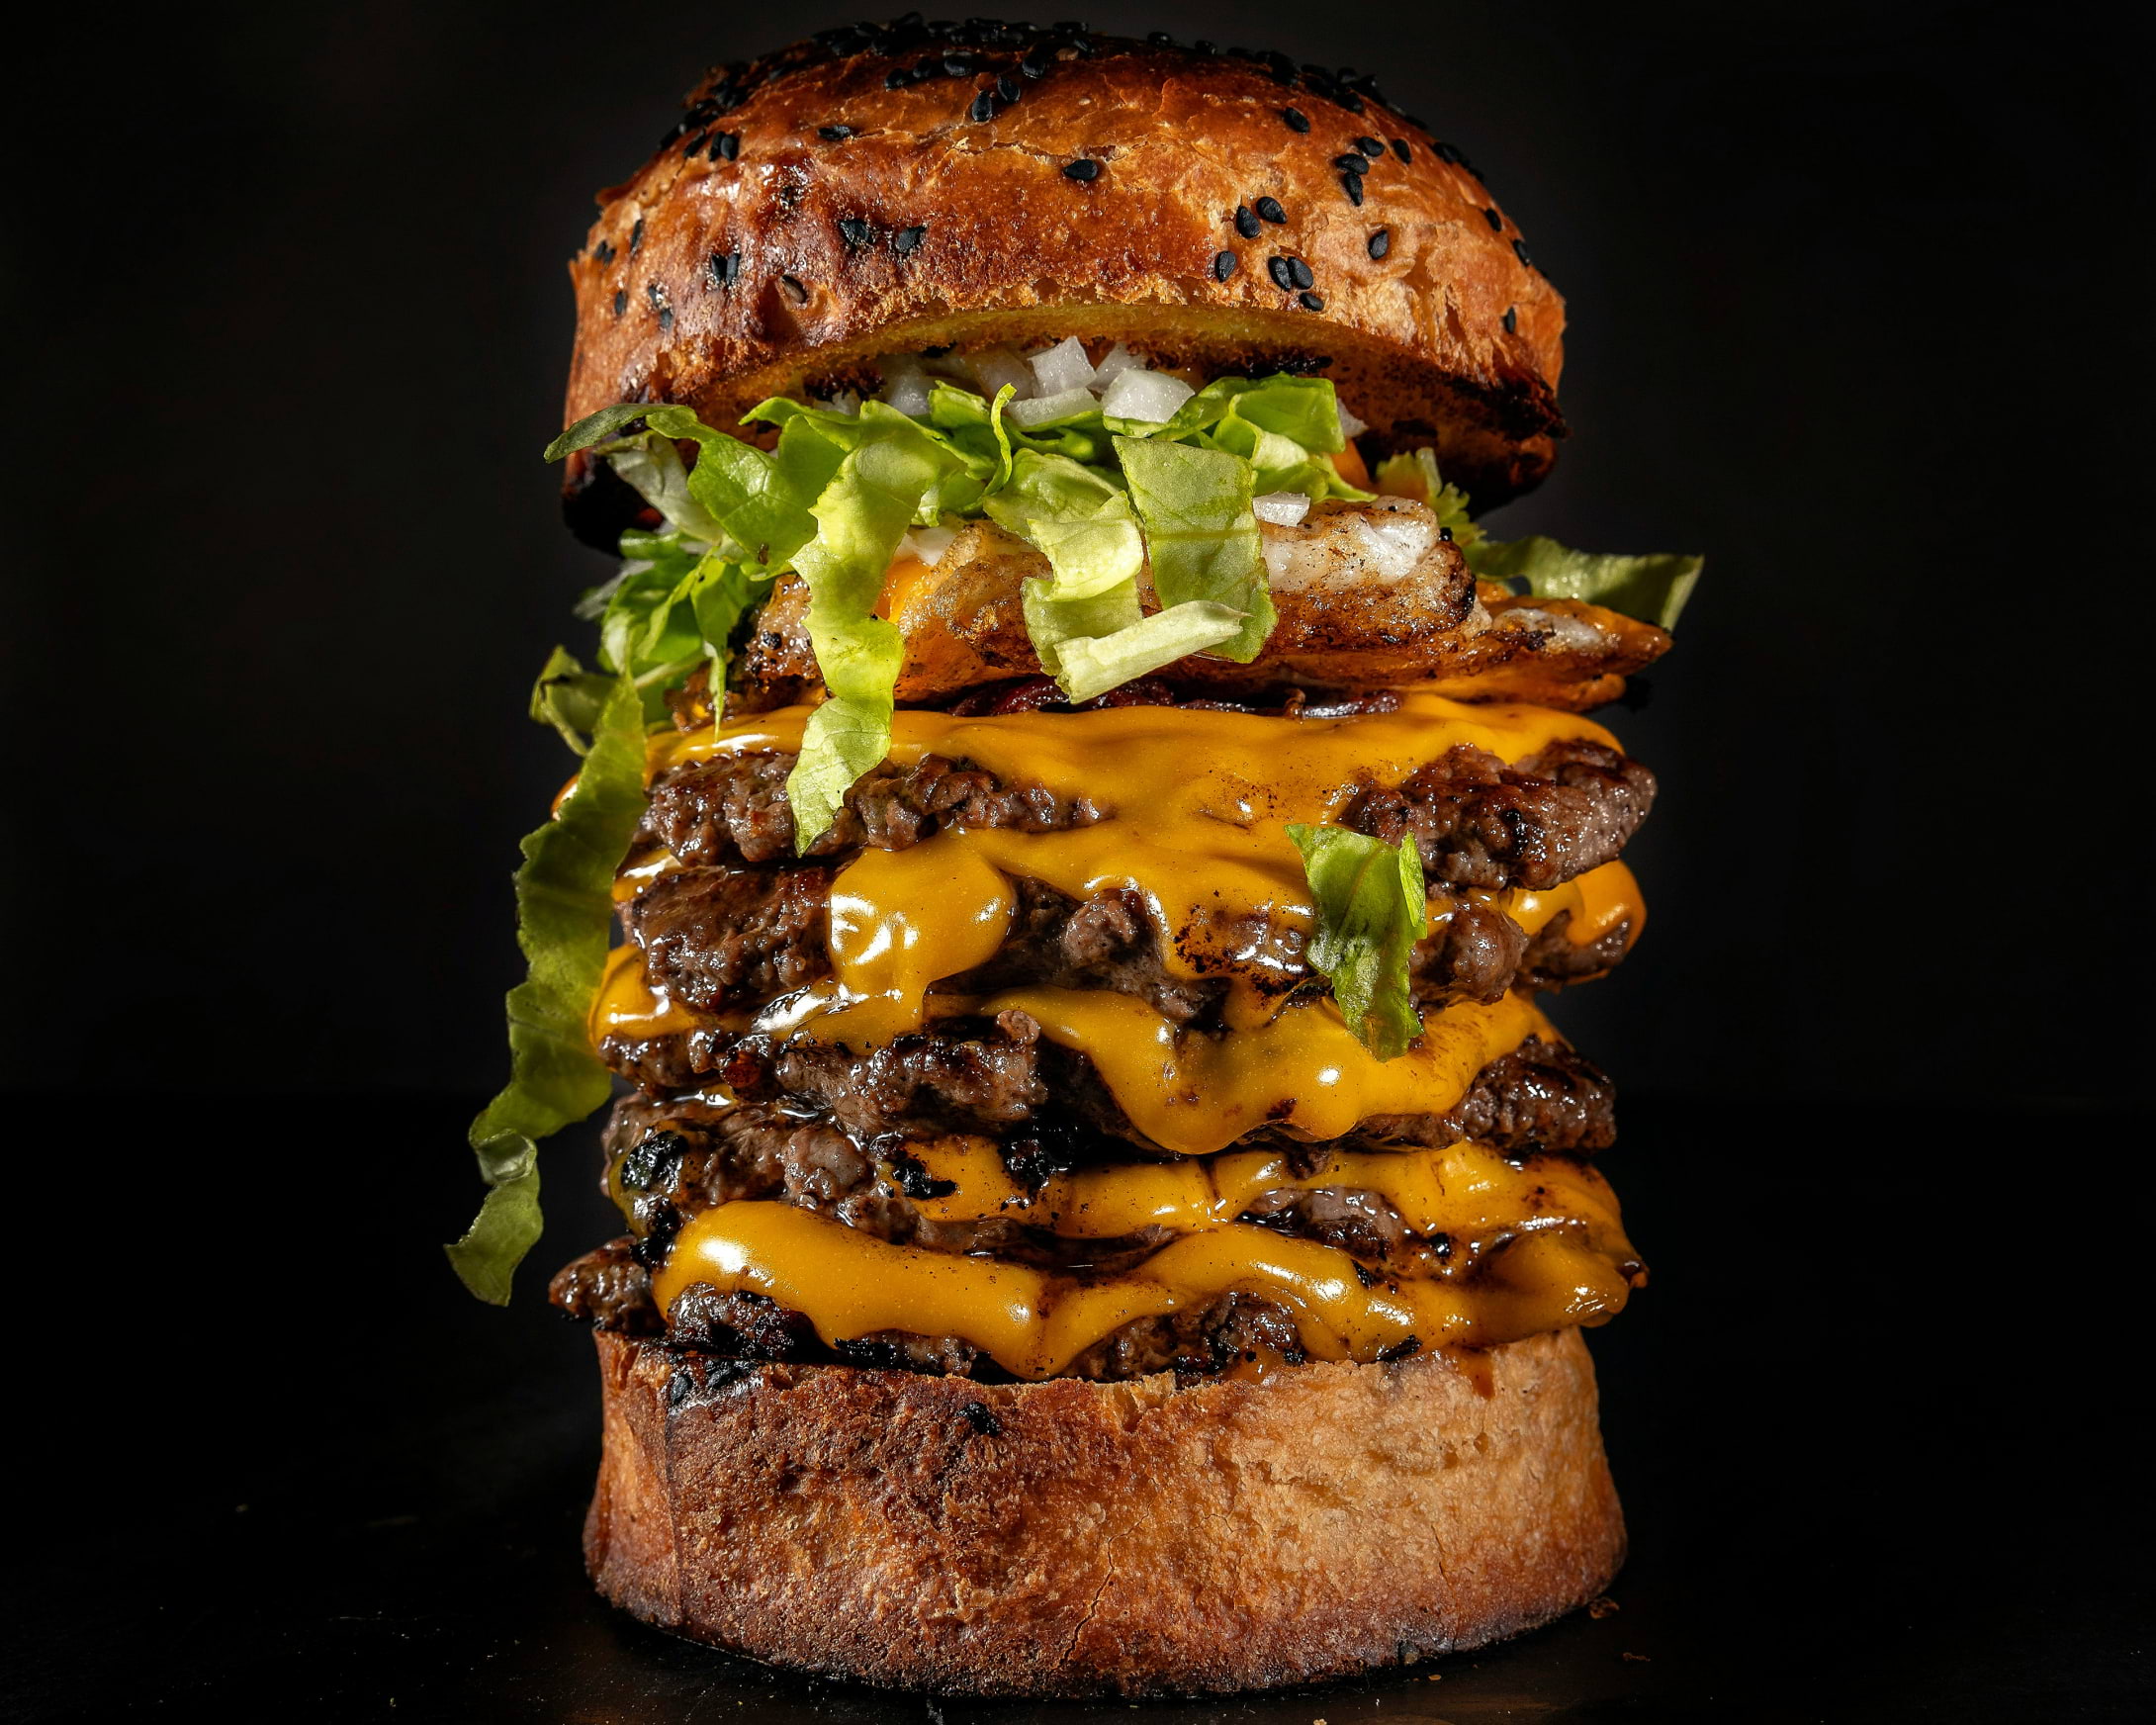 A towering burger with five patties